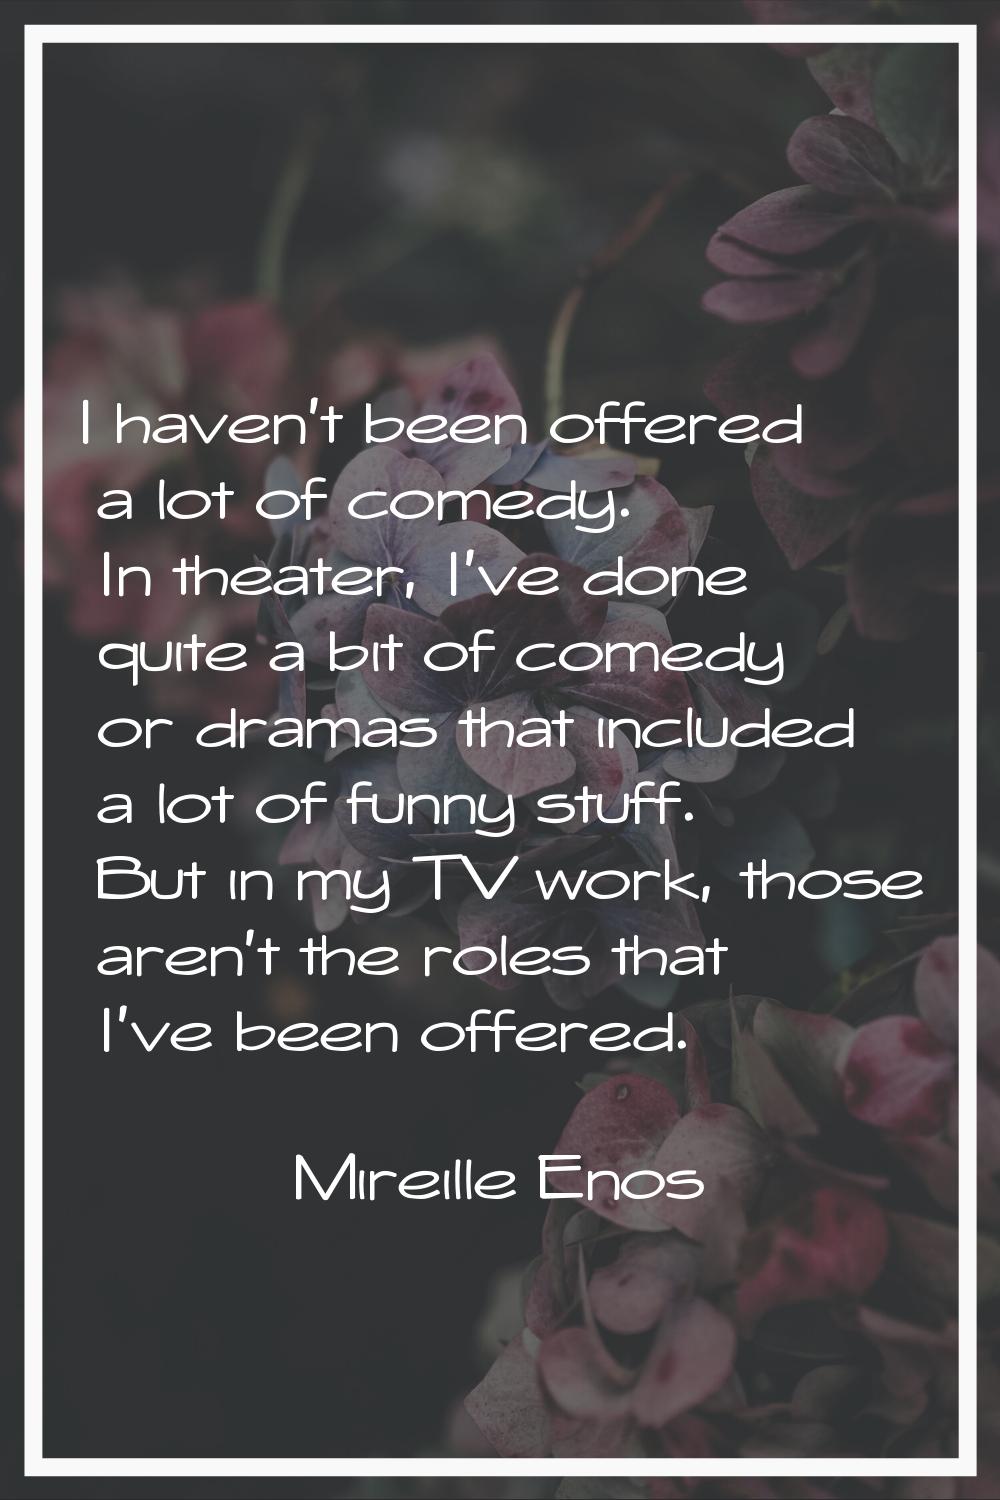 I haven't been offered a lot of comedy. In theater, I've done quite a bit of comedy or dramas that 